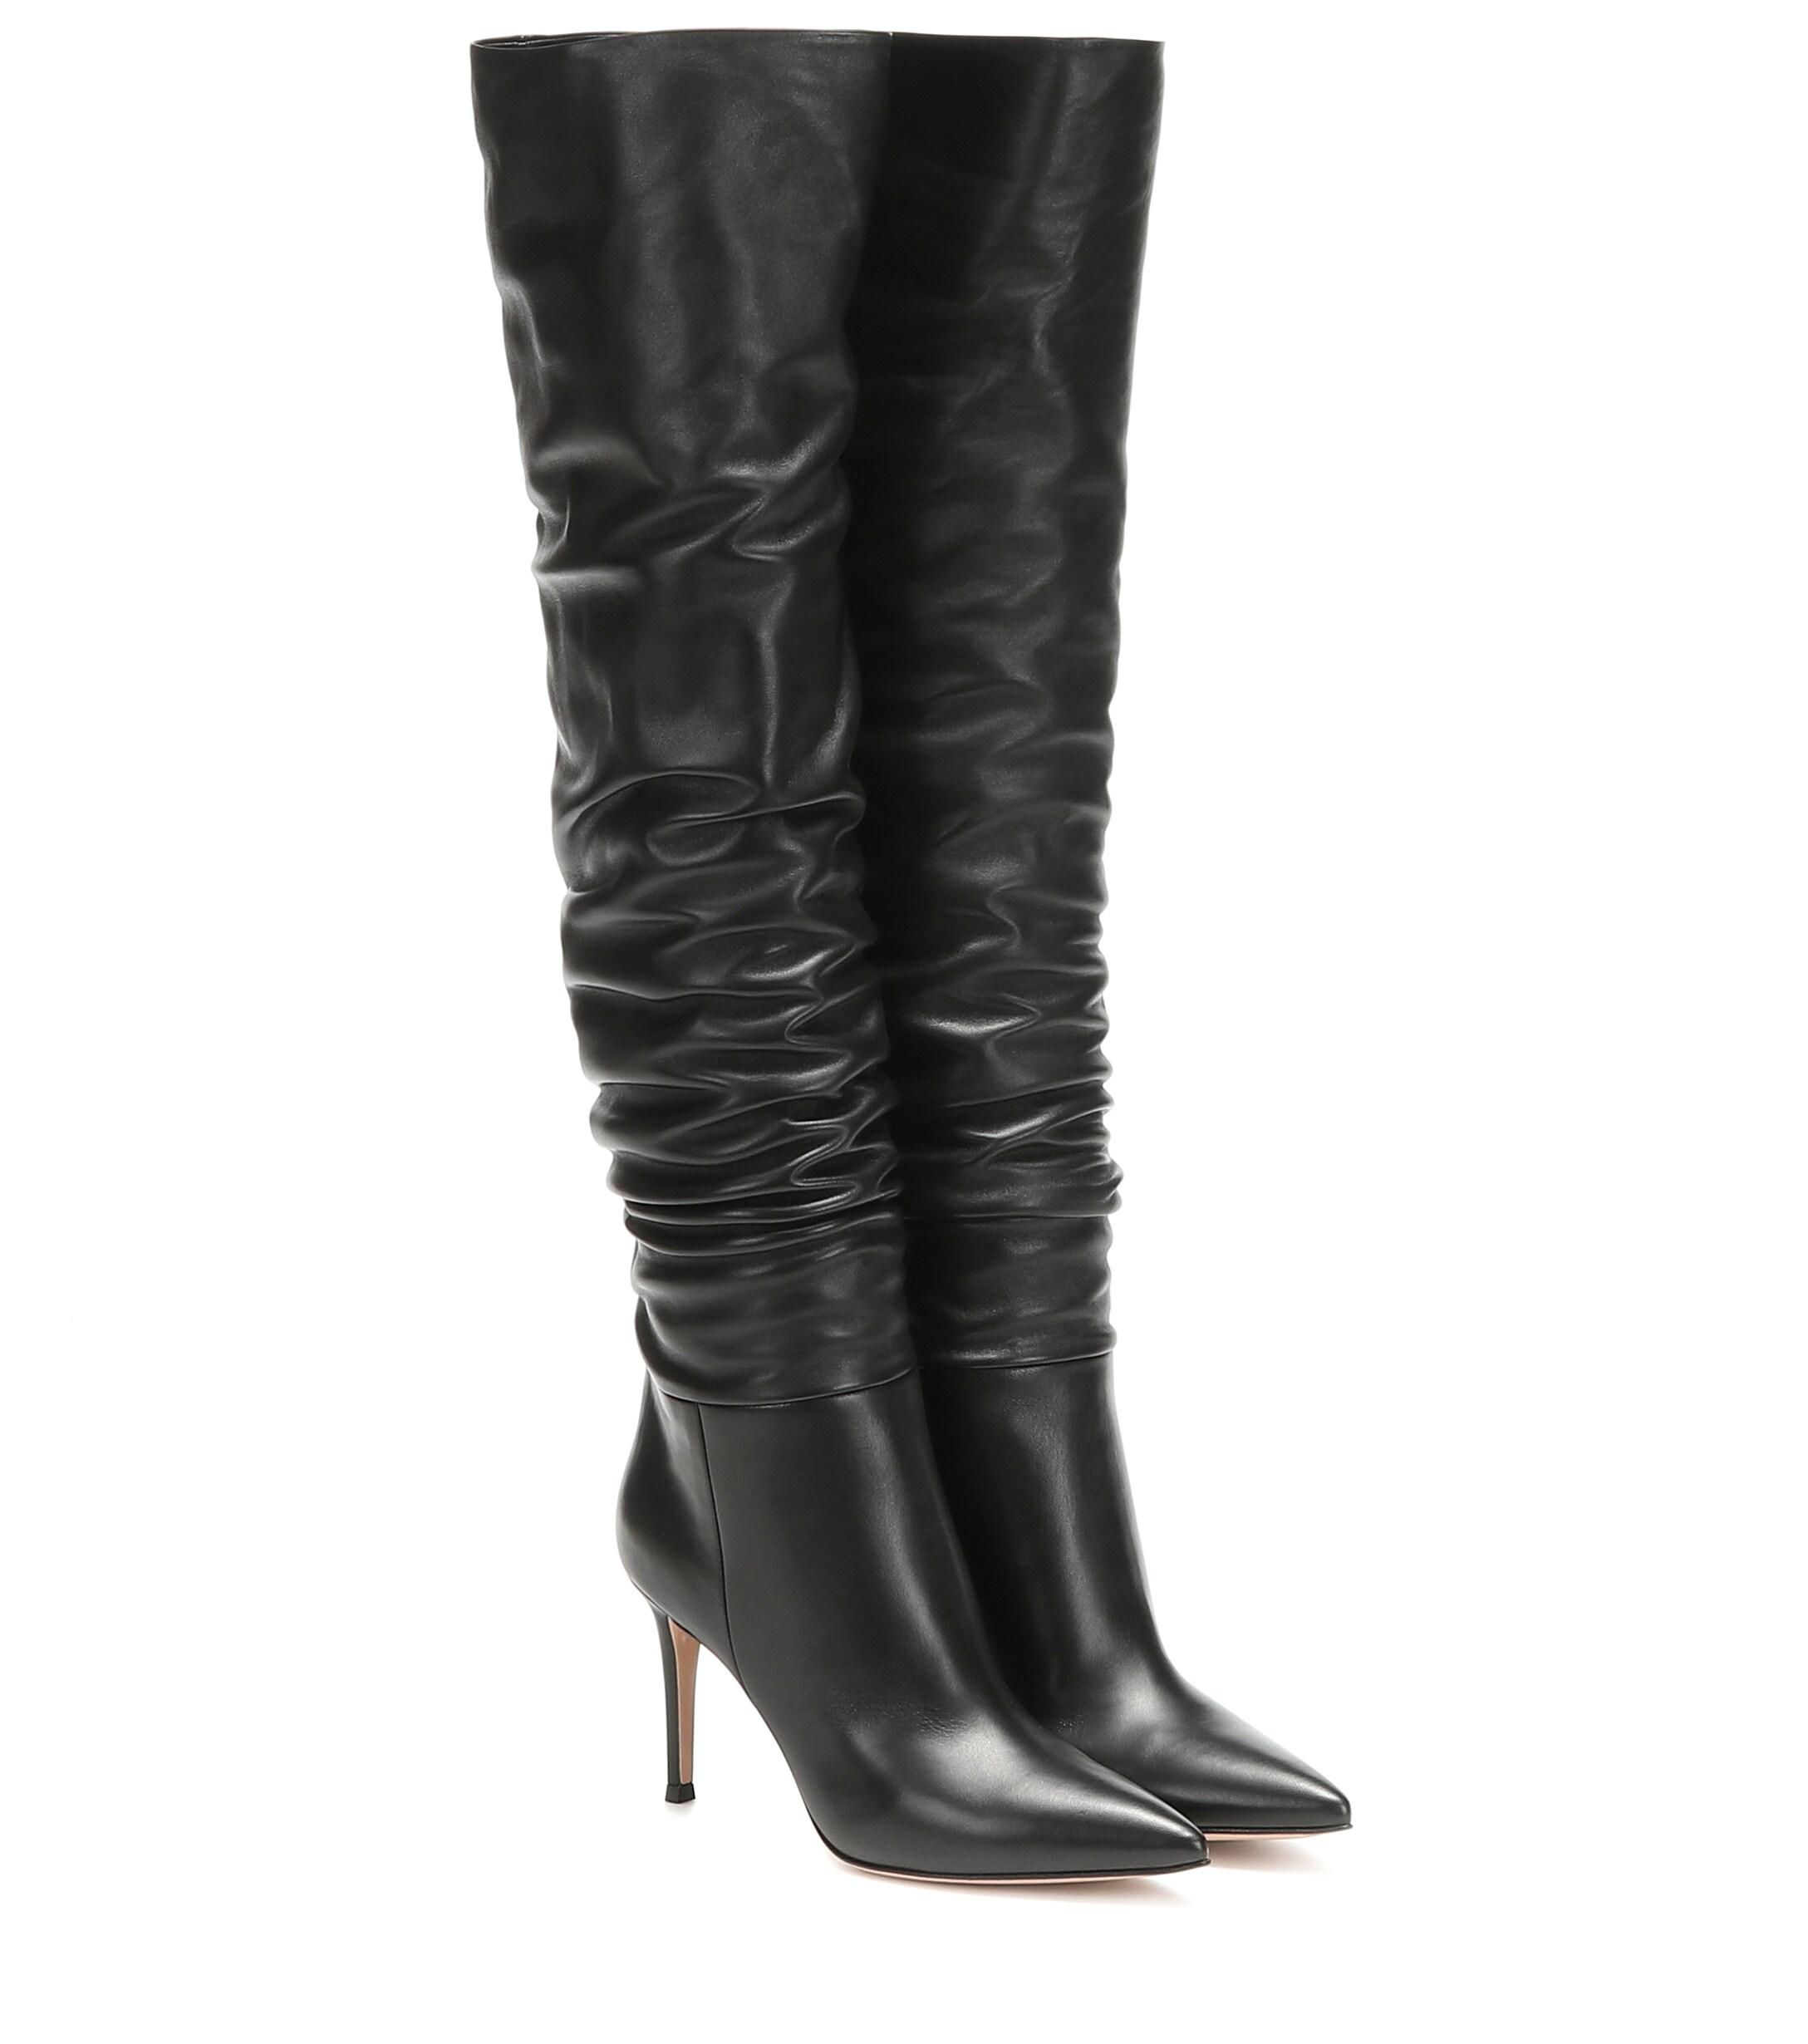 Gianvito Rossi Valeria 85 Over-the-knee Leather Boots in Black - Lyst